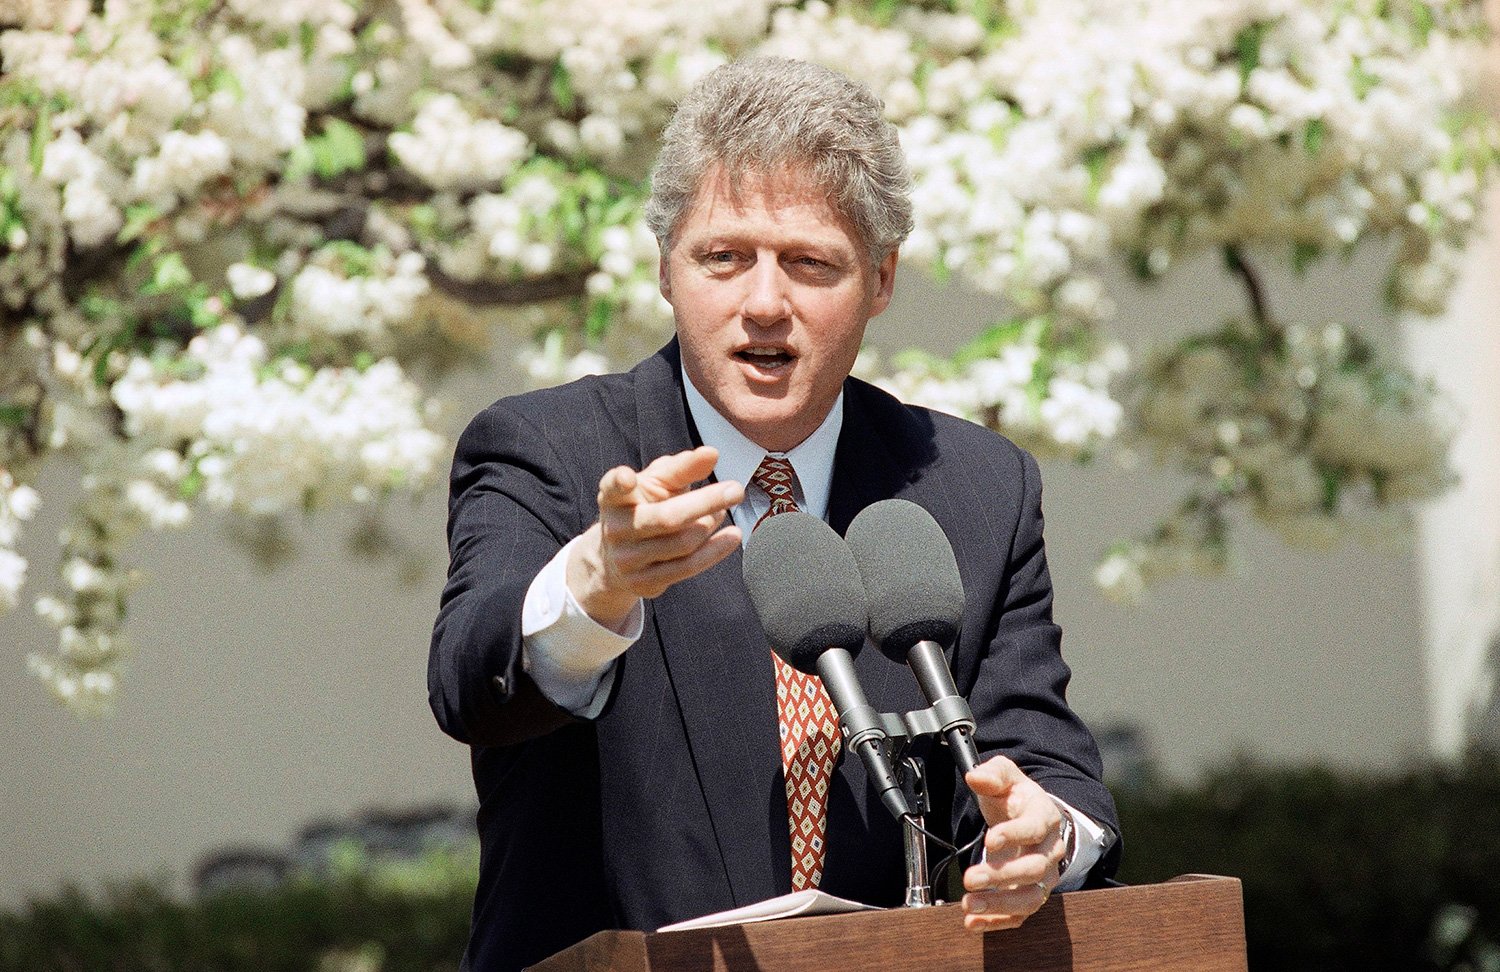  President Bill Clinton calls on a questioner during a news conference in the Rose Garden of the White House in Washington, Tuesday, April 21, 1993 to discuss the situation in Waco, Texas. The President ordered the Justice Department and the Treasury